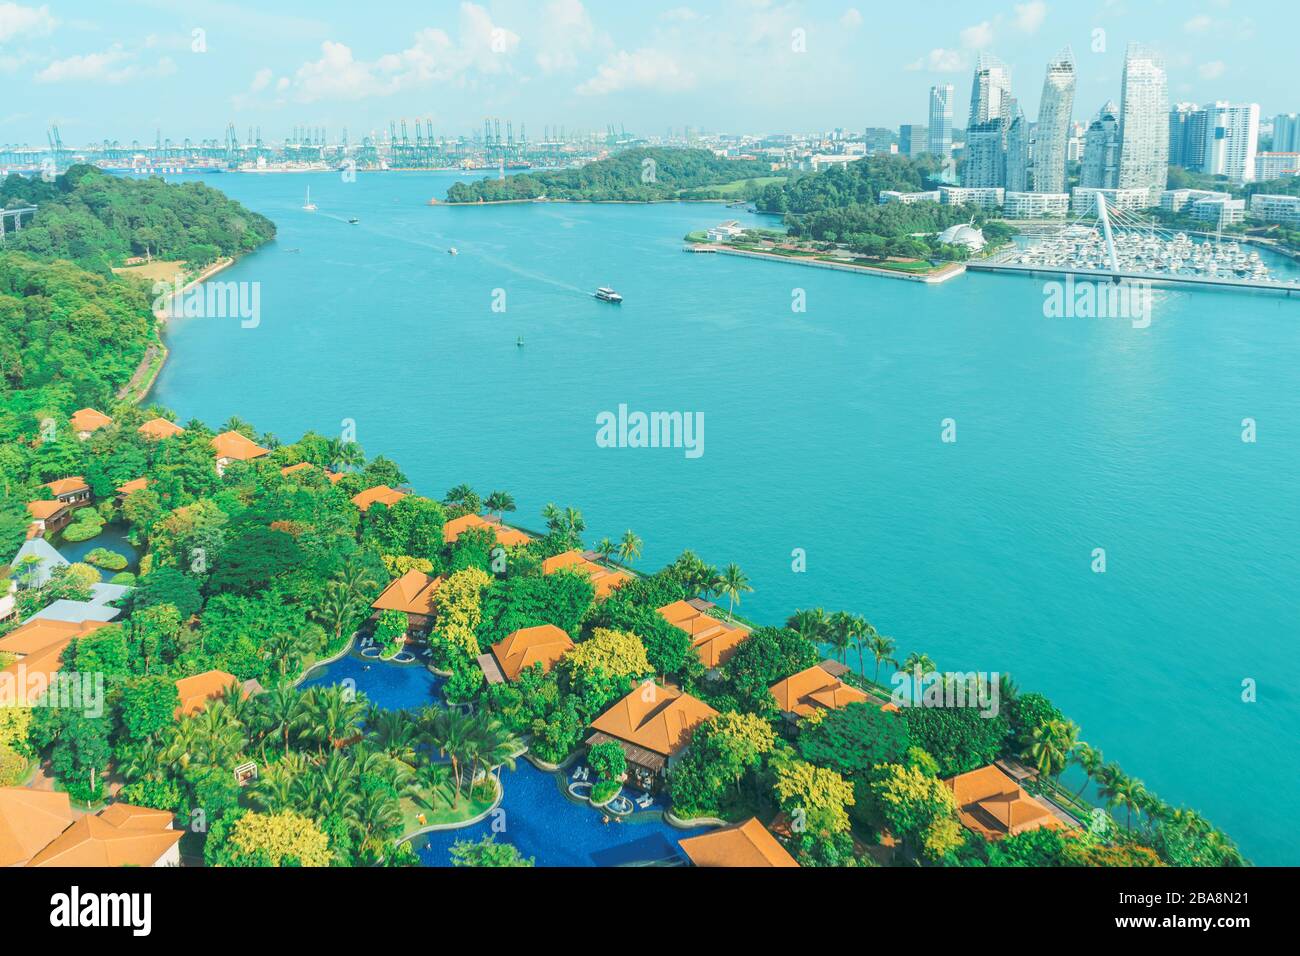 KEPPEL HARBOR / SINGAPORE, 29 APRIL 2018 - Reflections at Keppel Bay in Singapore is a 99-year leasehold luxury waterfront residential complex on appr Stock Photo